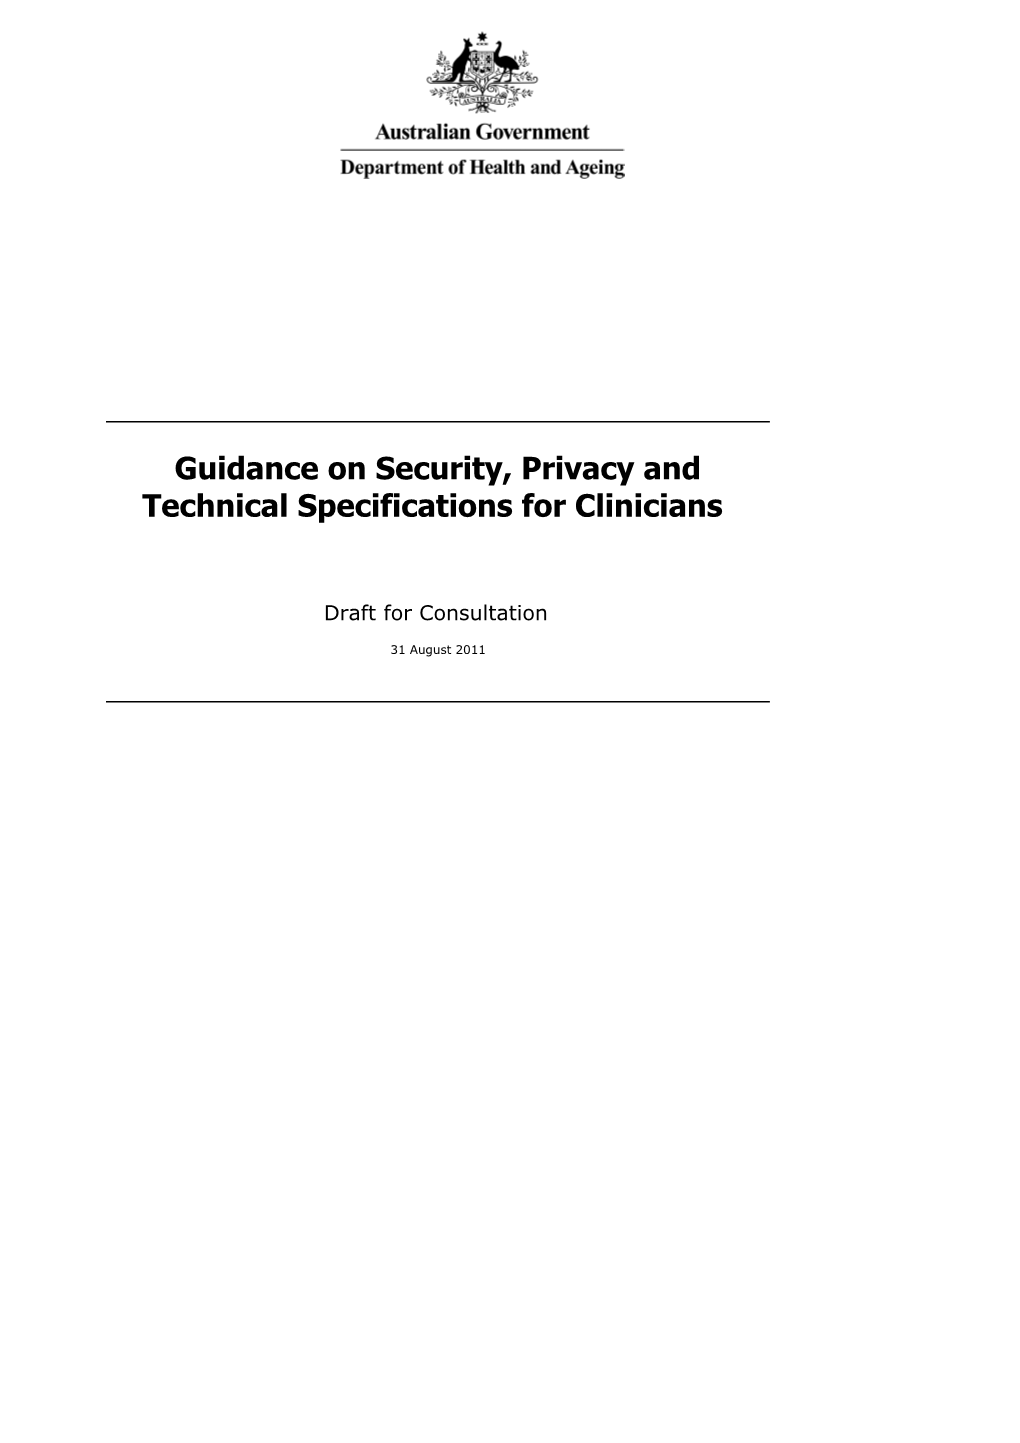 Guidance on Security, Privacy and Technical Specifications for Clinicians